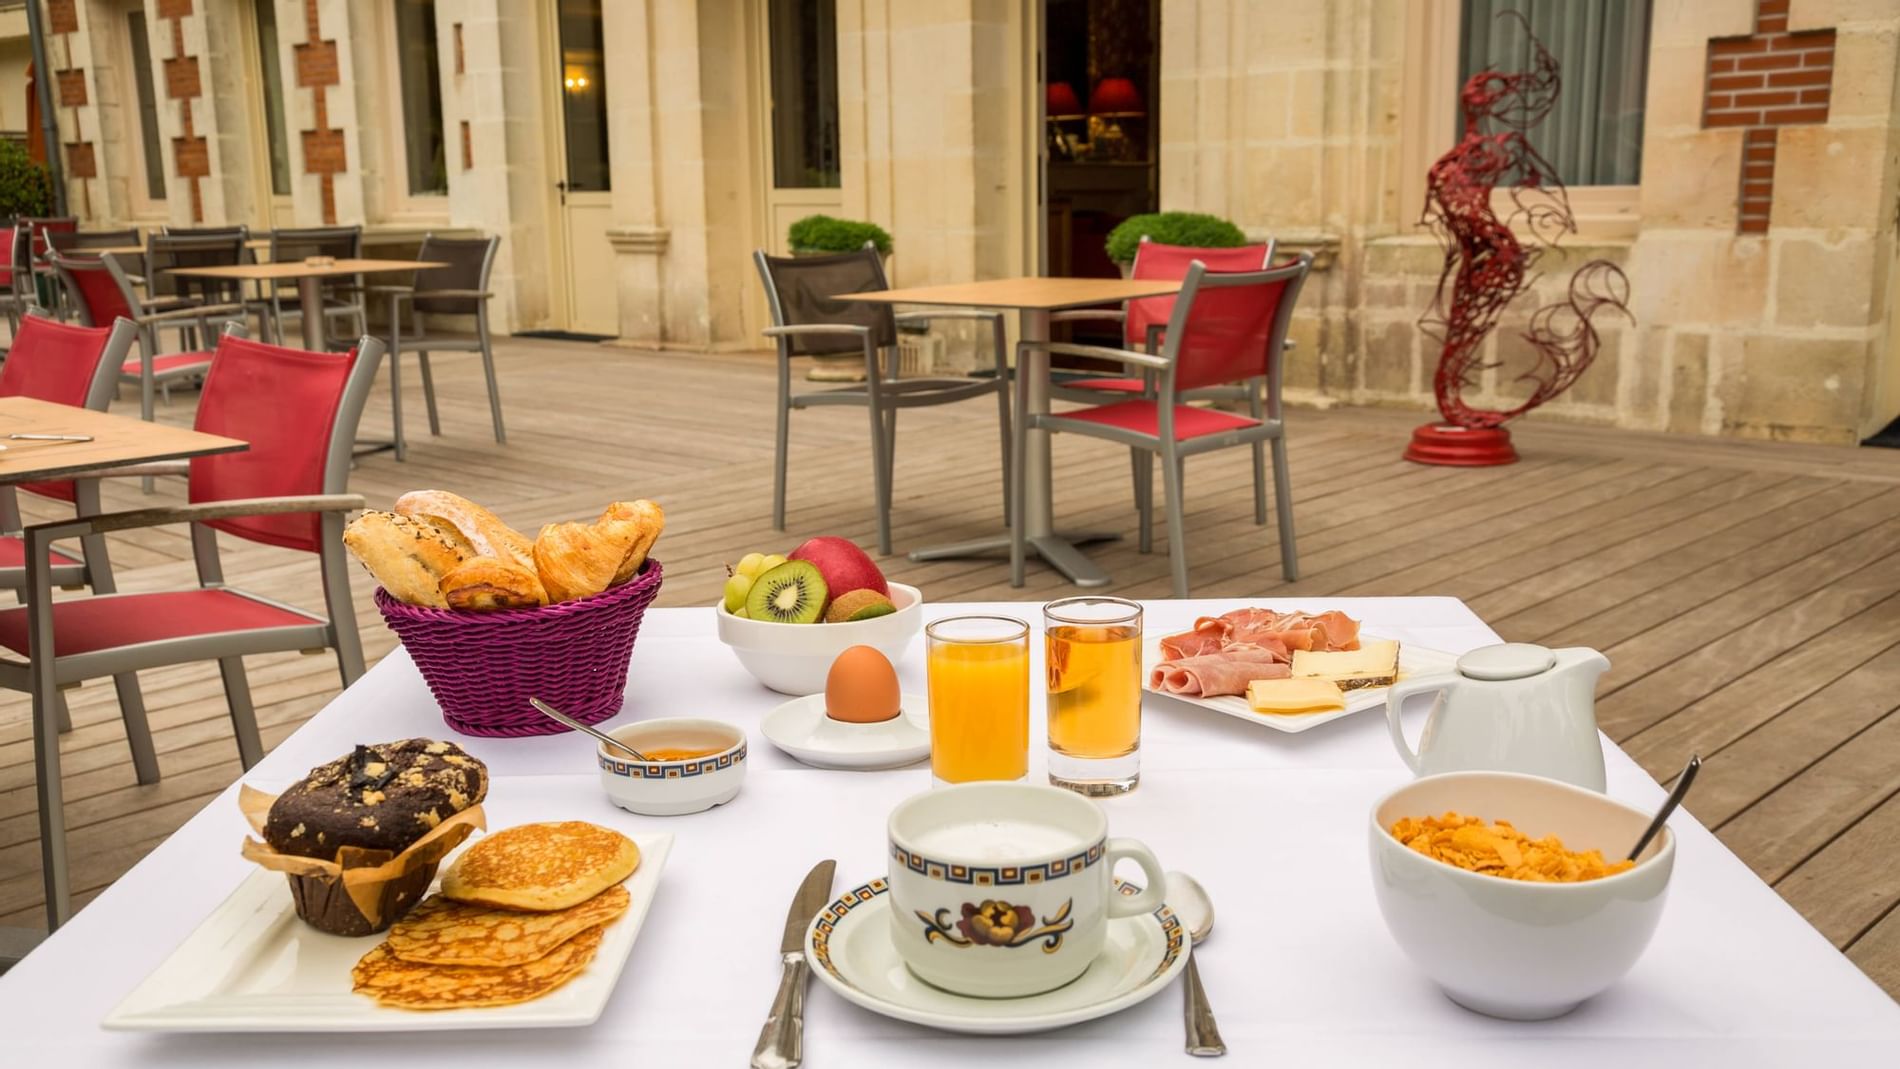 Breakfast & drinks with an outdoor view at The Originals Hotels